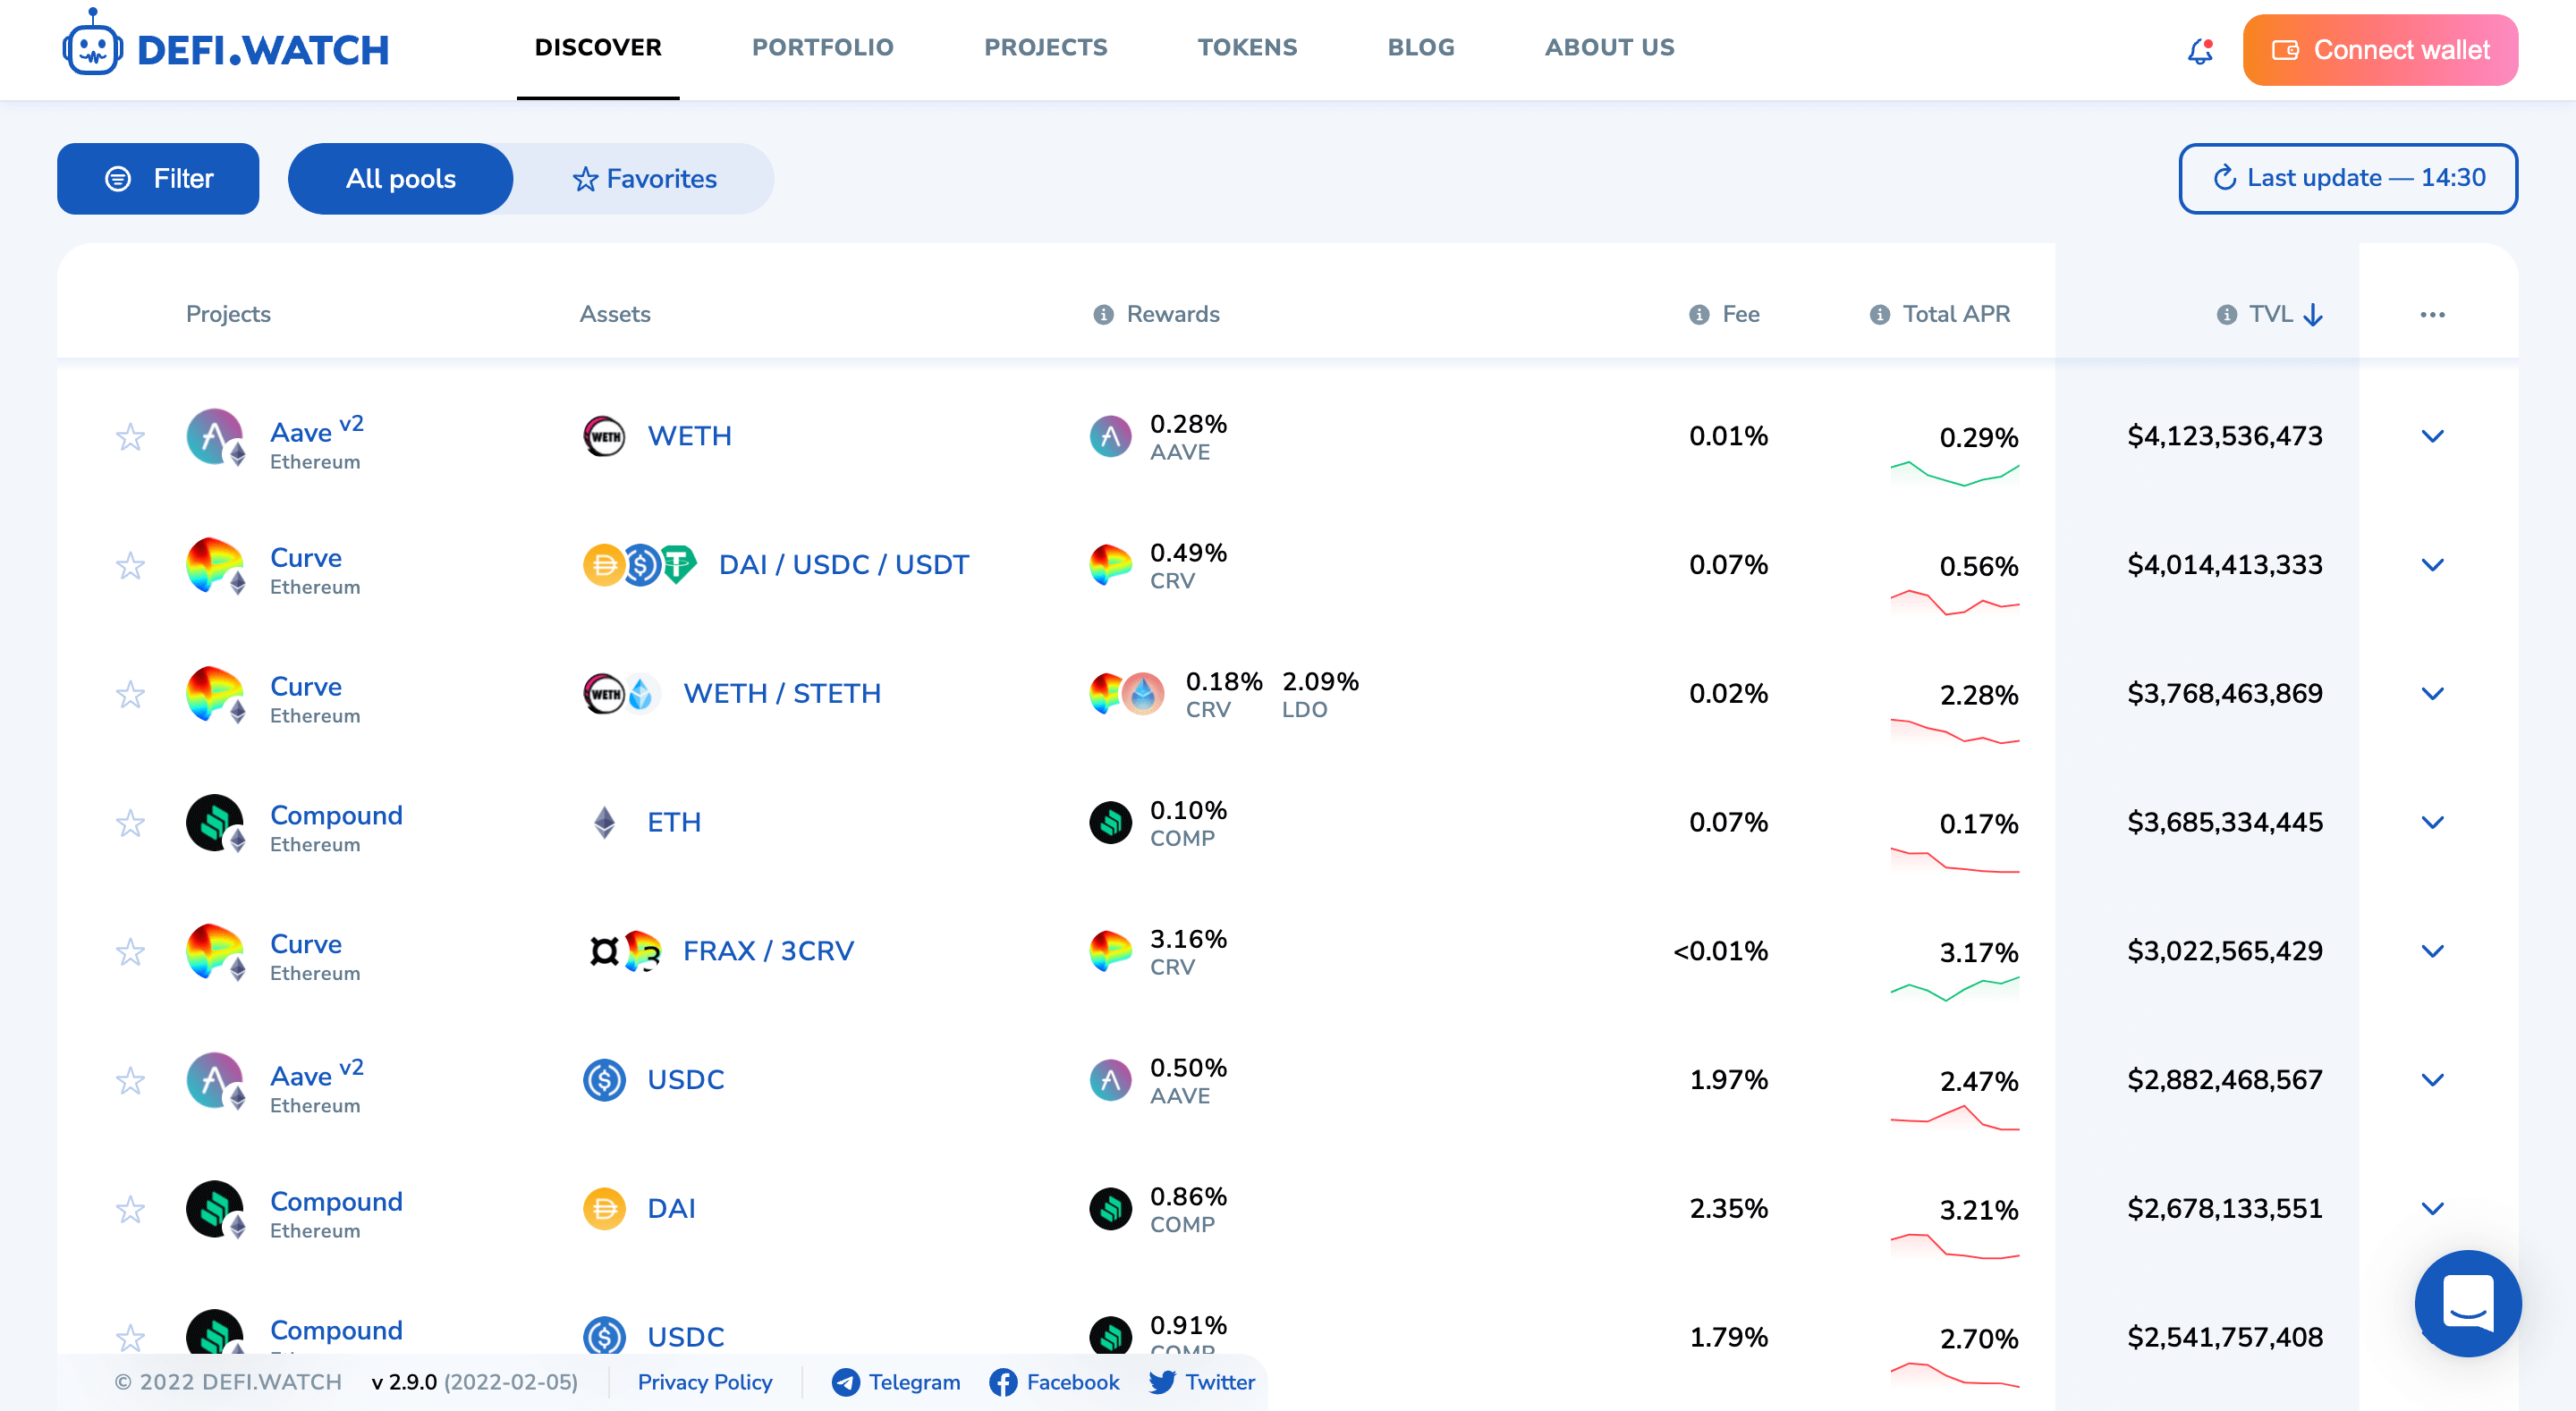 The Defi Watch gives users free access to a great many liquidity pools on 13 blockchains